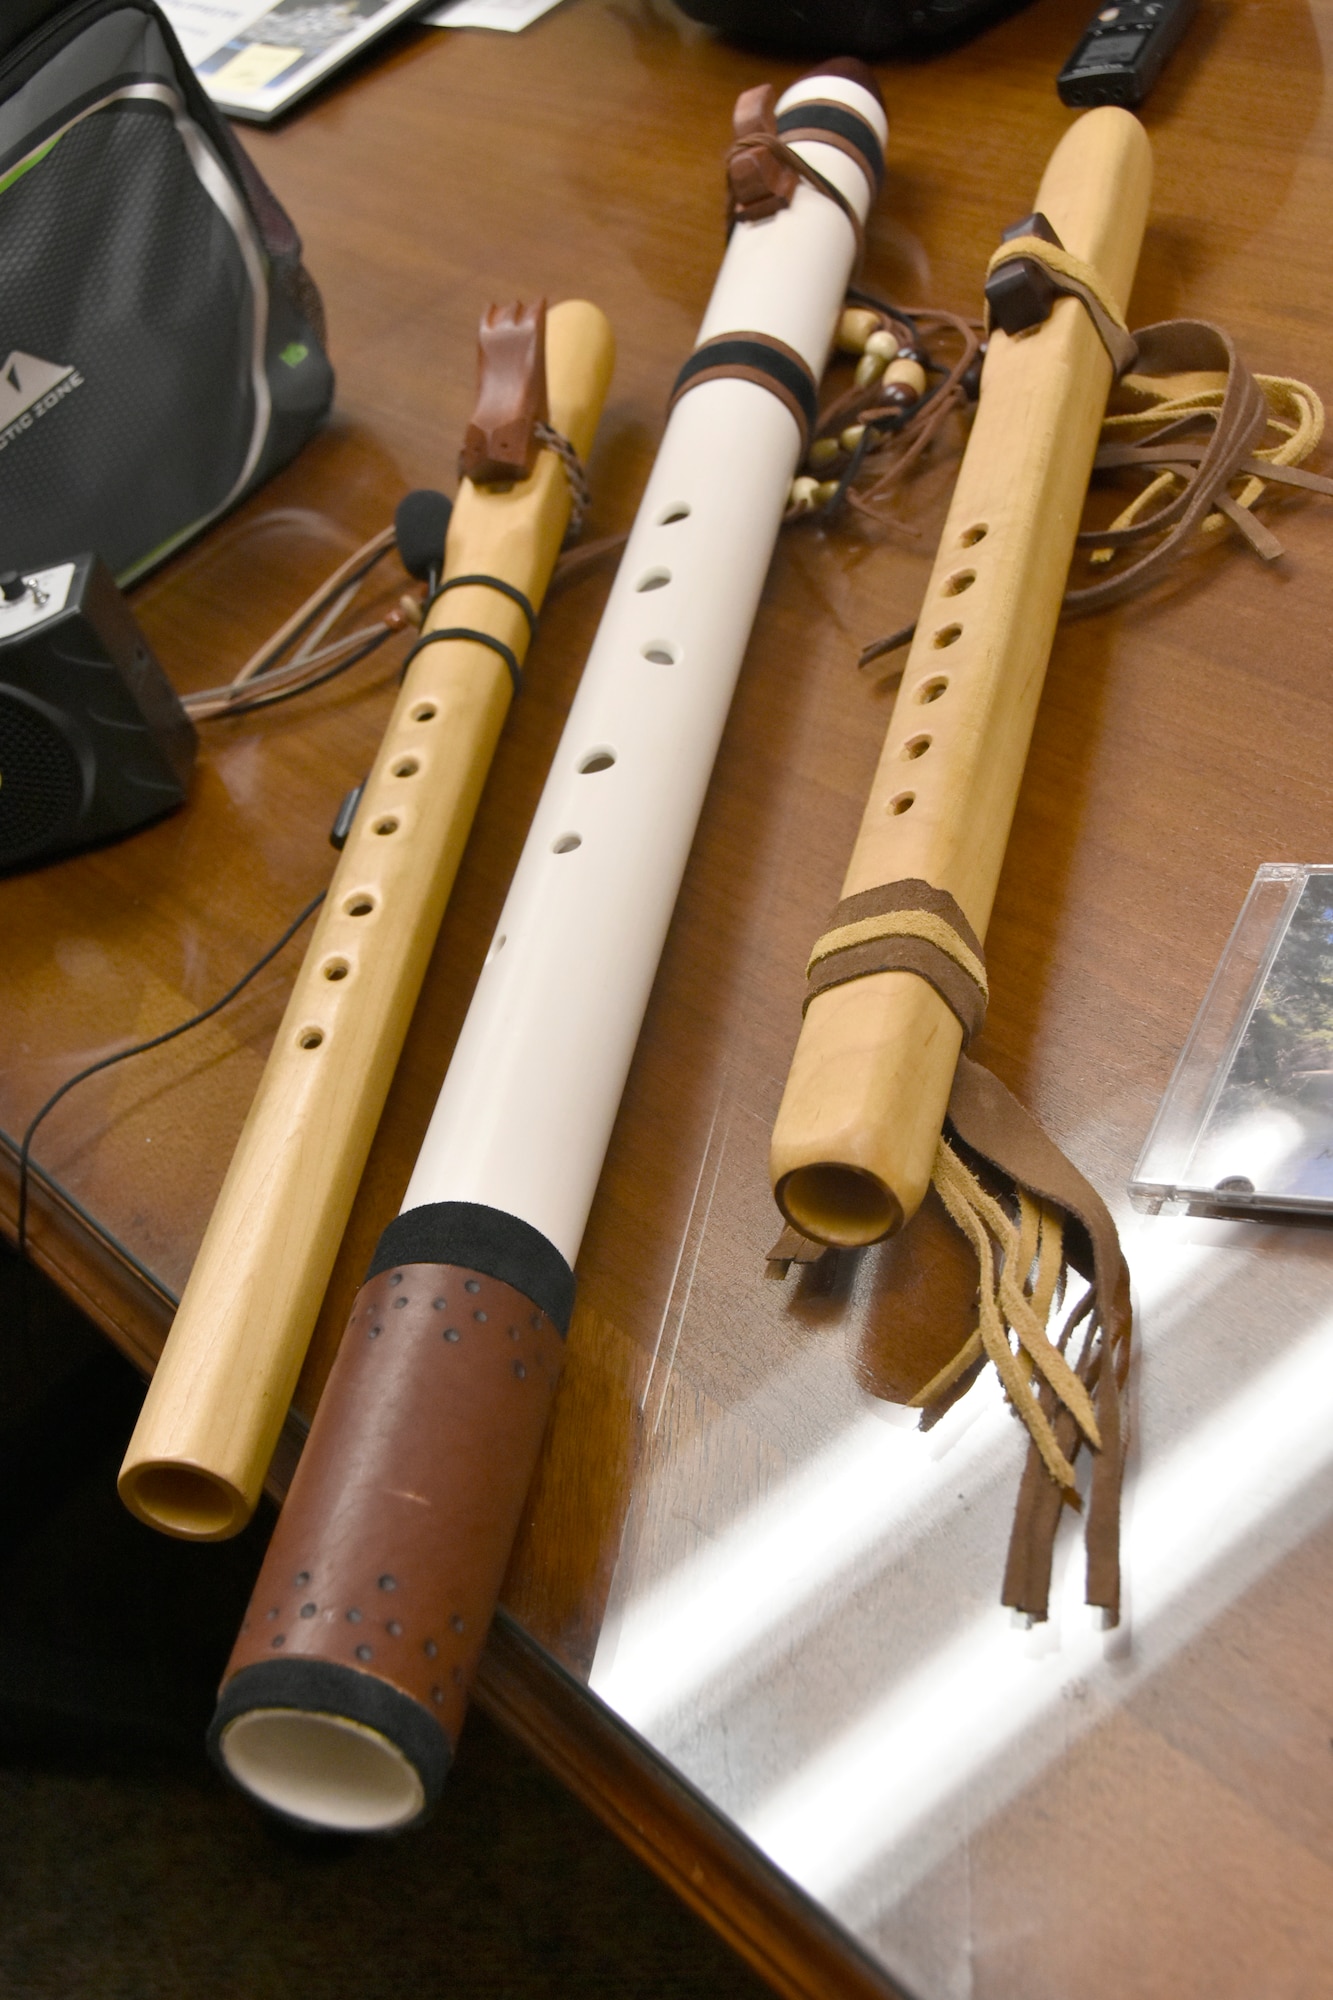 Three of the Native American flutes made by Kevin Ashley, an inside machinist with the Arnold Engineering Development Complex Model and Machine Shop at Arnold Air Force Base, Tenn., are pictured here. Ashley has been making his own flutes for more than a decade. Two of the flutes are made from maple, while Ashley made the bass flute in the center from PVC pipe. (U.S. Air Force photo by Bradley Hicks)